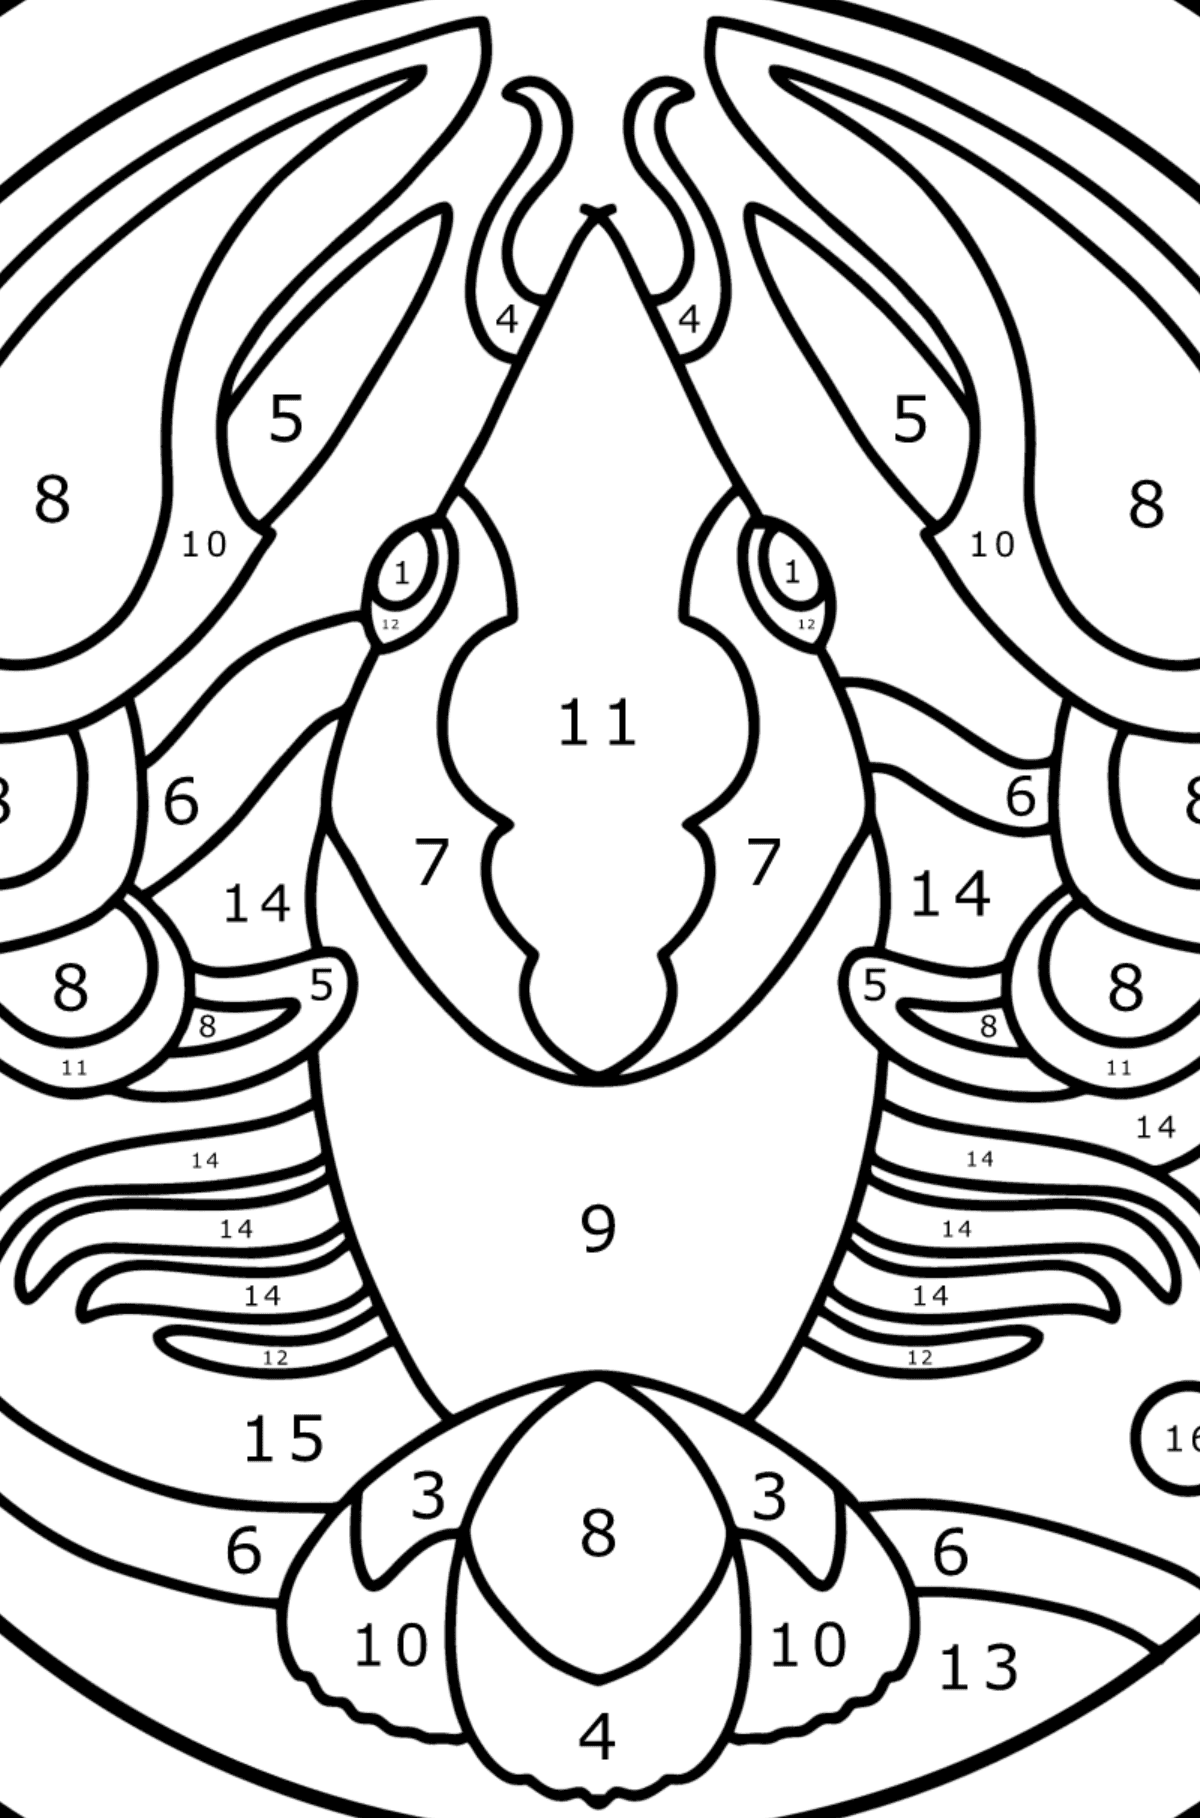 Coloring page for kids - Cancer zodiac sign - Coloring by Numbers for Kids